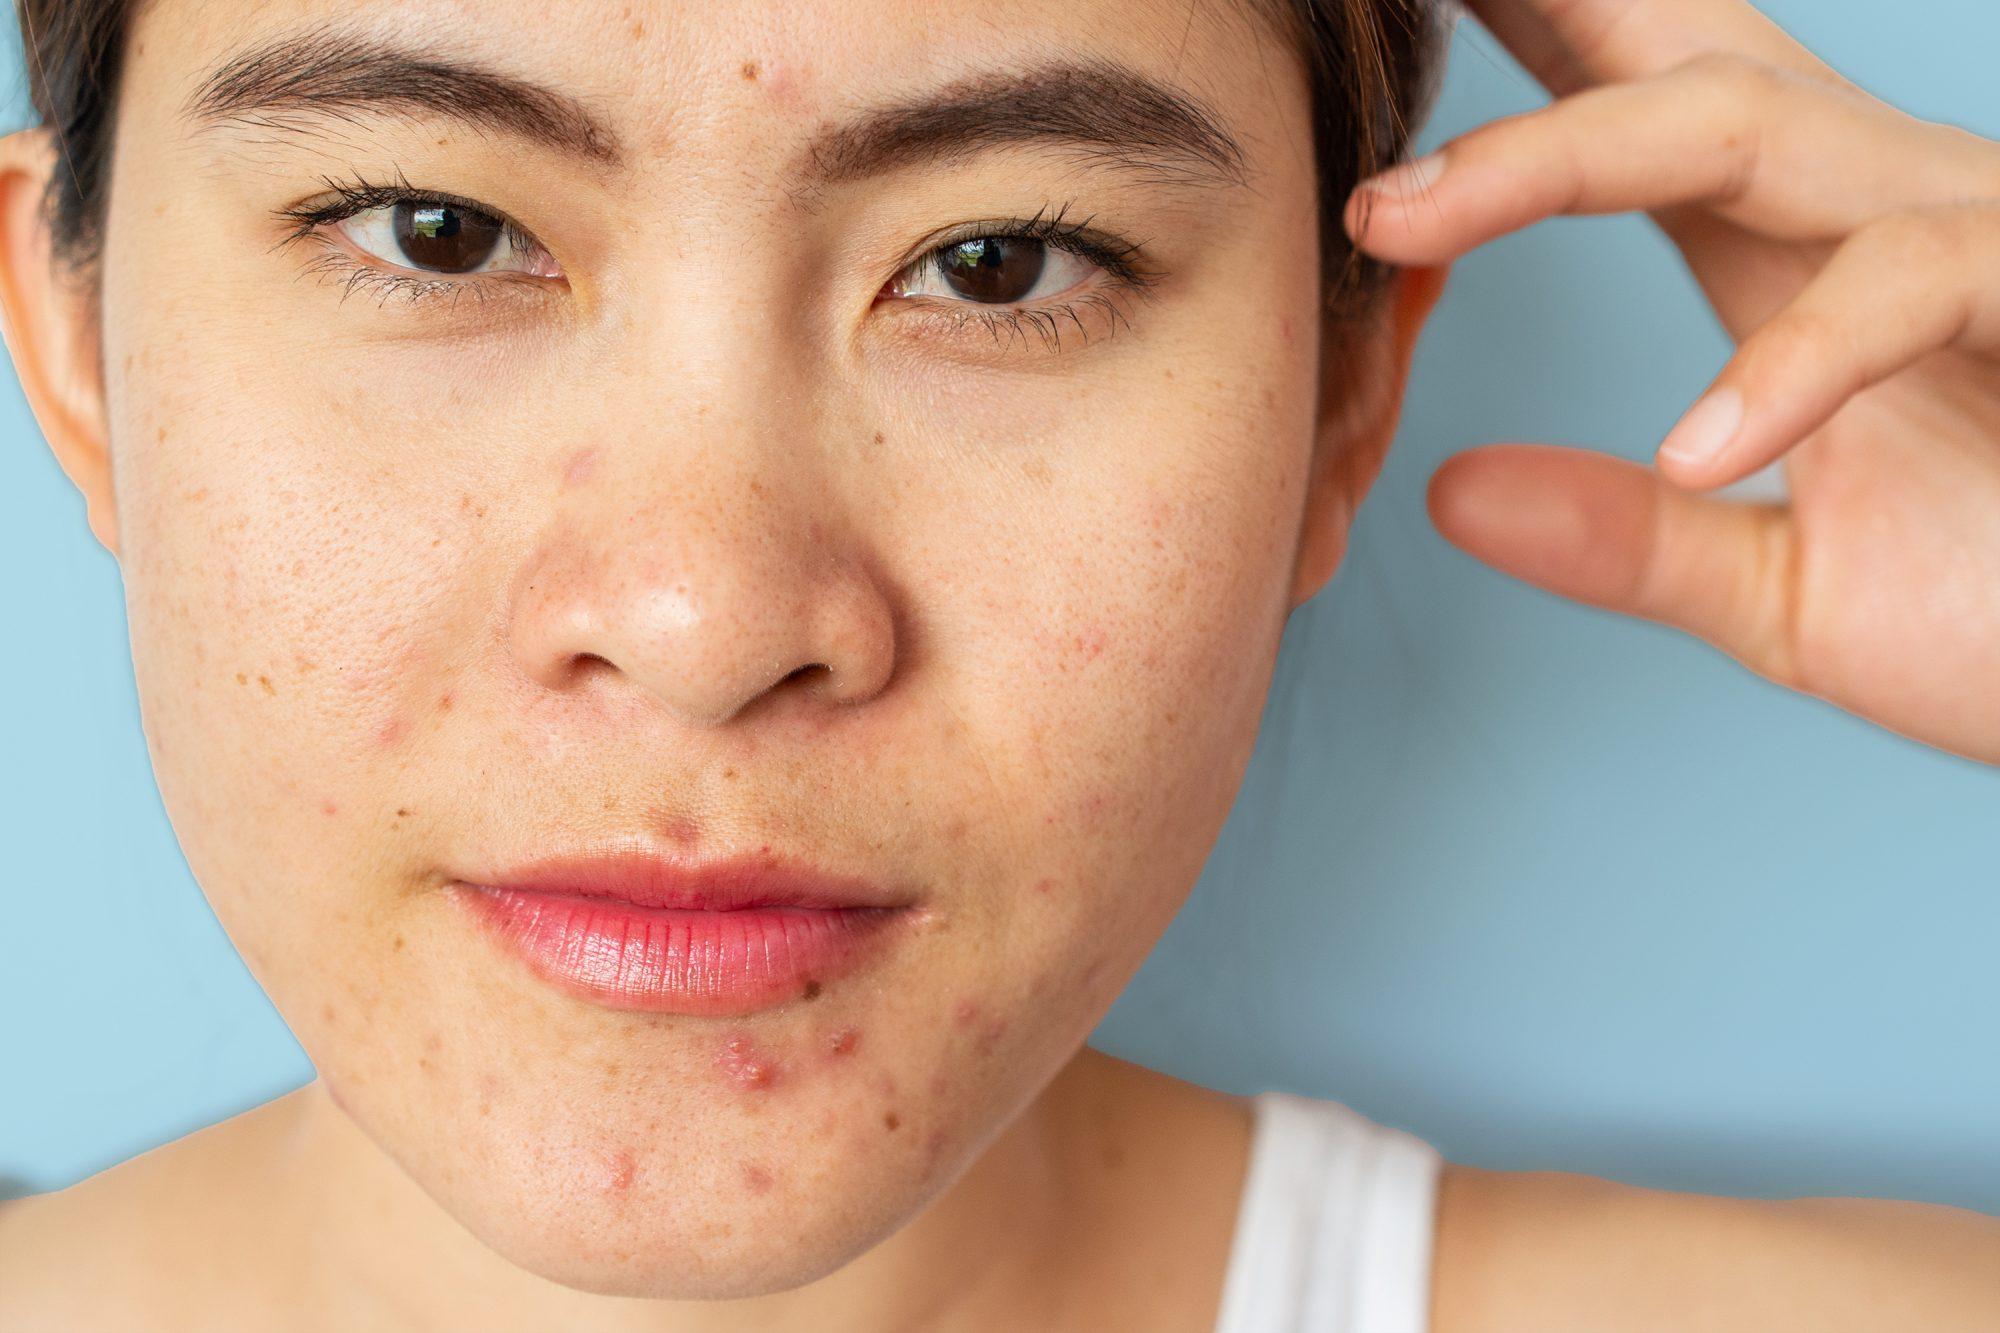 What Does Niacinamide Do for the Skin Barrier?